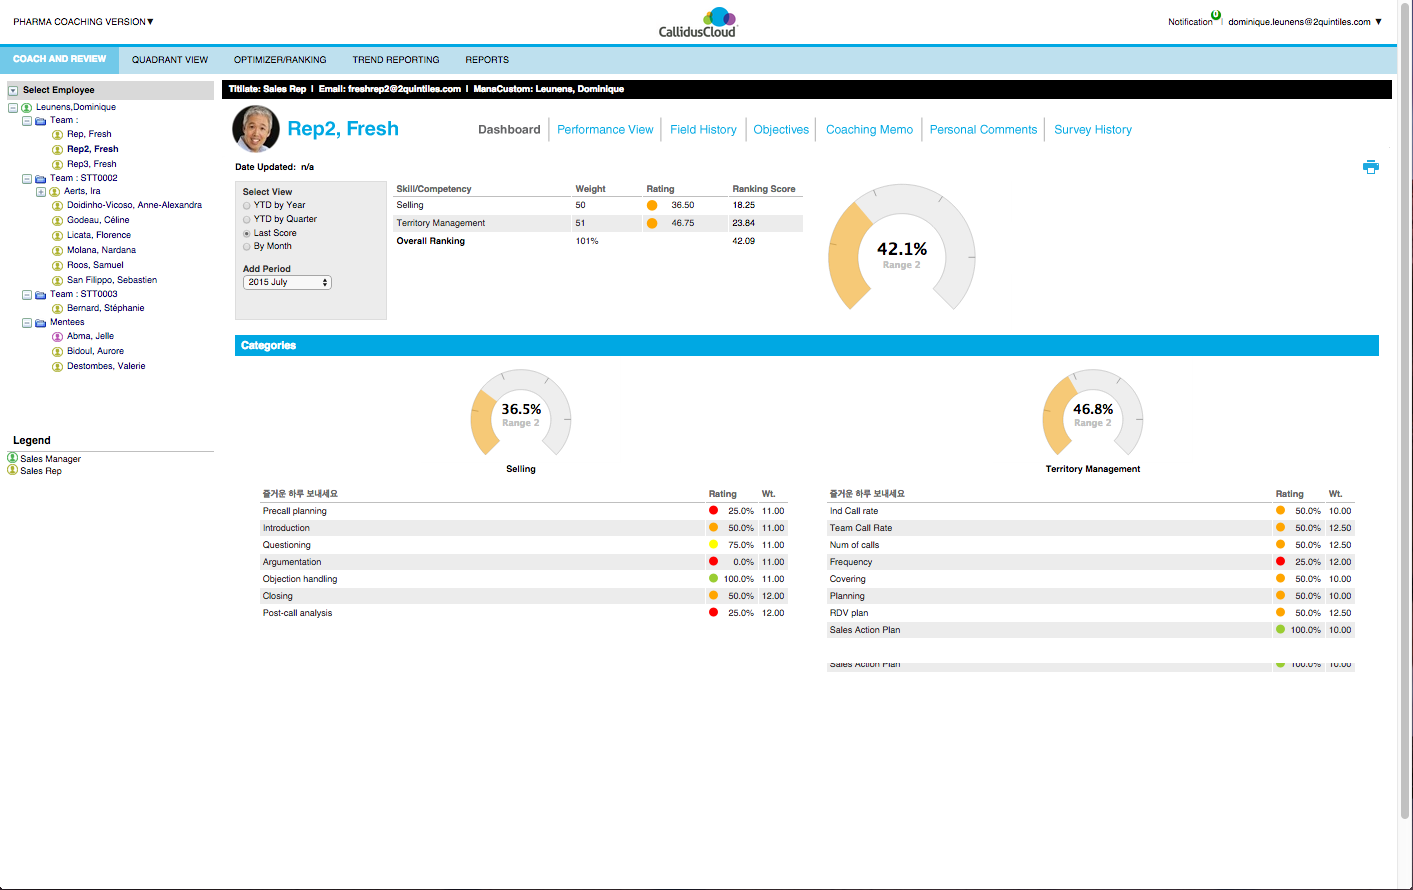 Screen capture of CSS reskinned Sales Performance Manager UI.